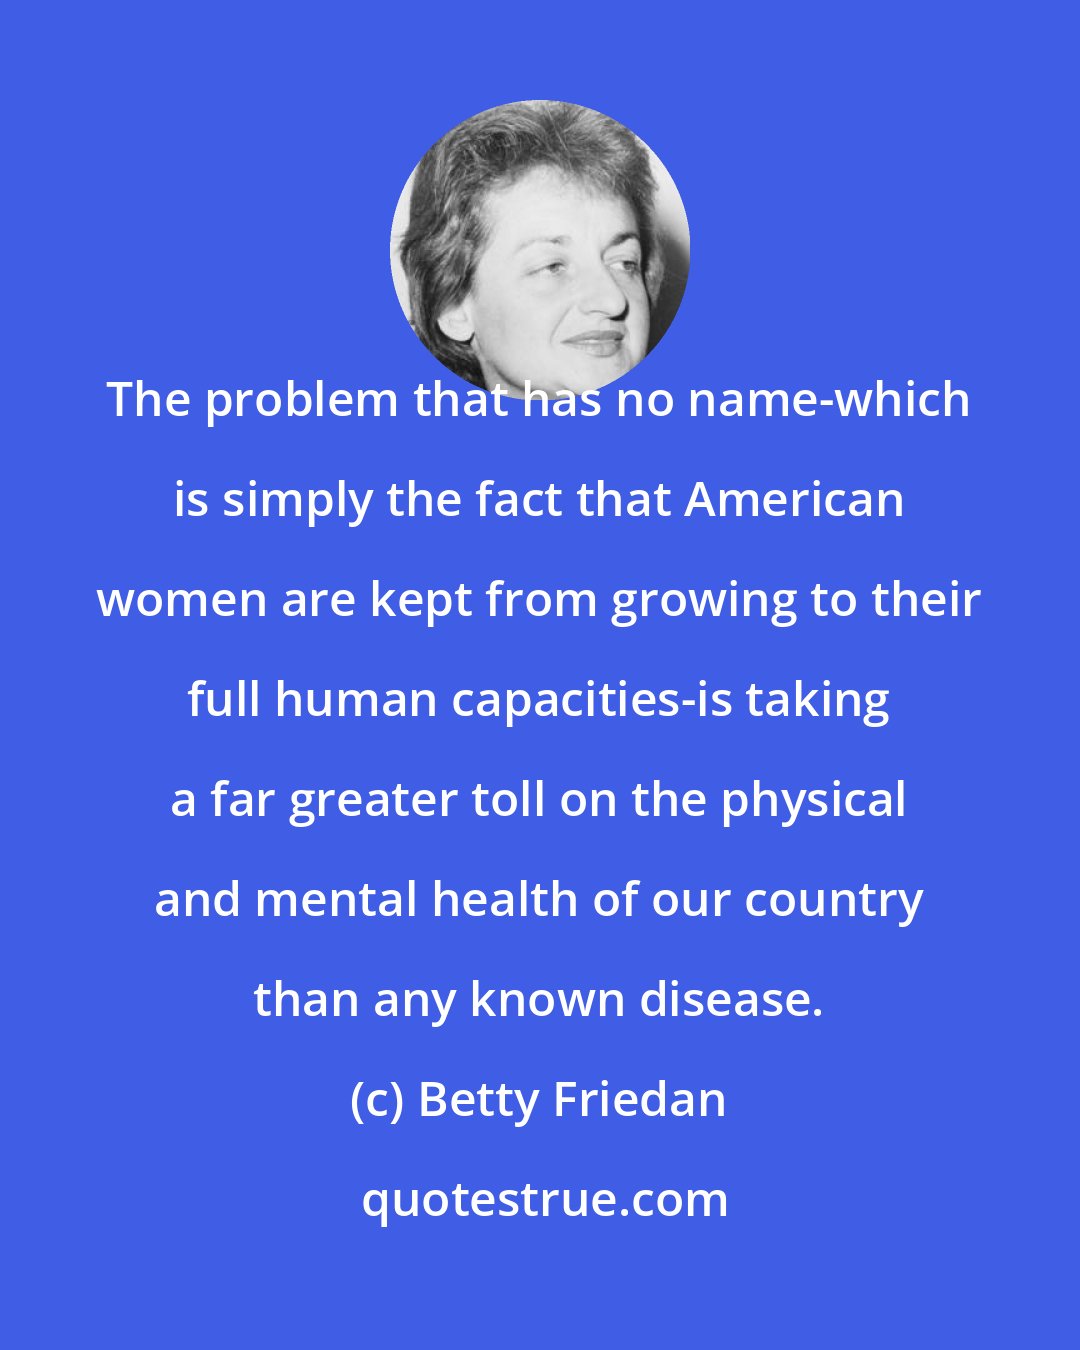 Betty Friedan: The problem that has no name-which is simply the fact that American women are kept from growing to their full human capacities-is taking a far greater toll on the physical and mental health of our country than any known disease.